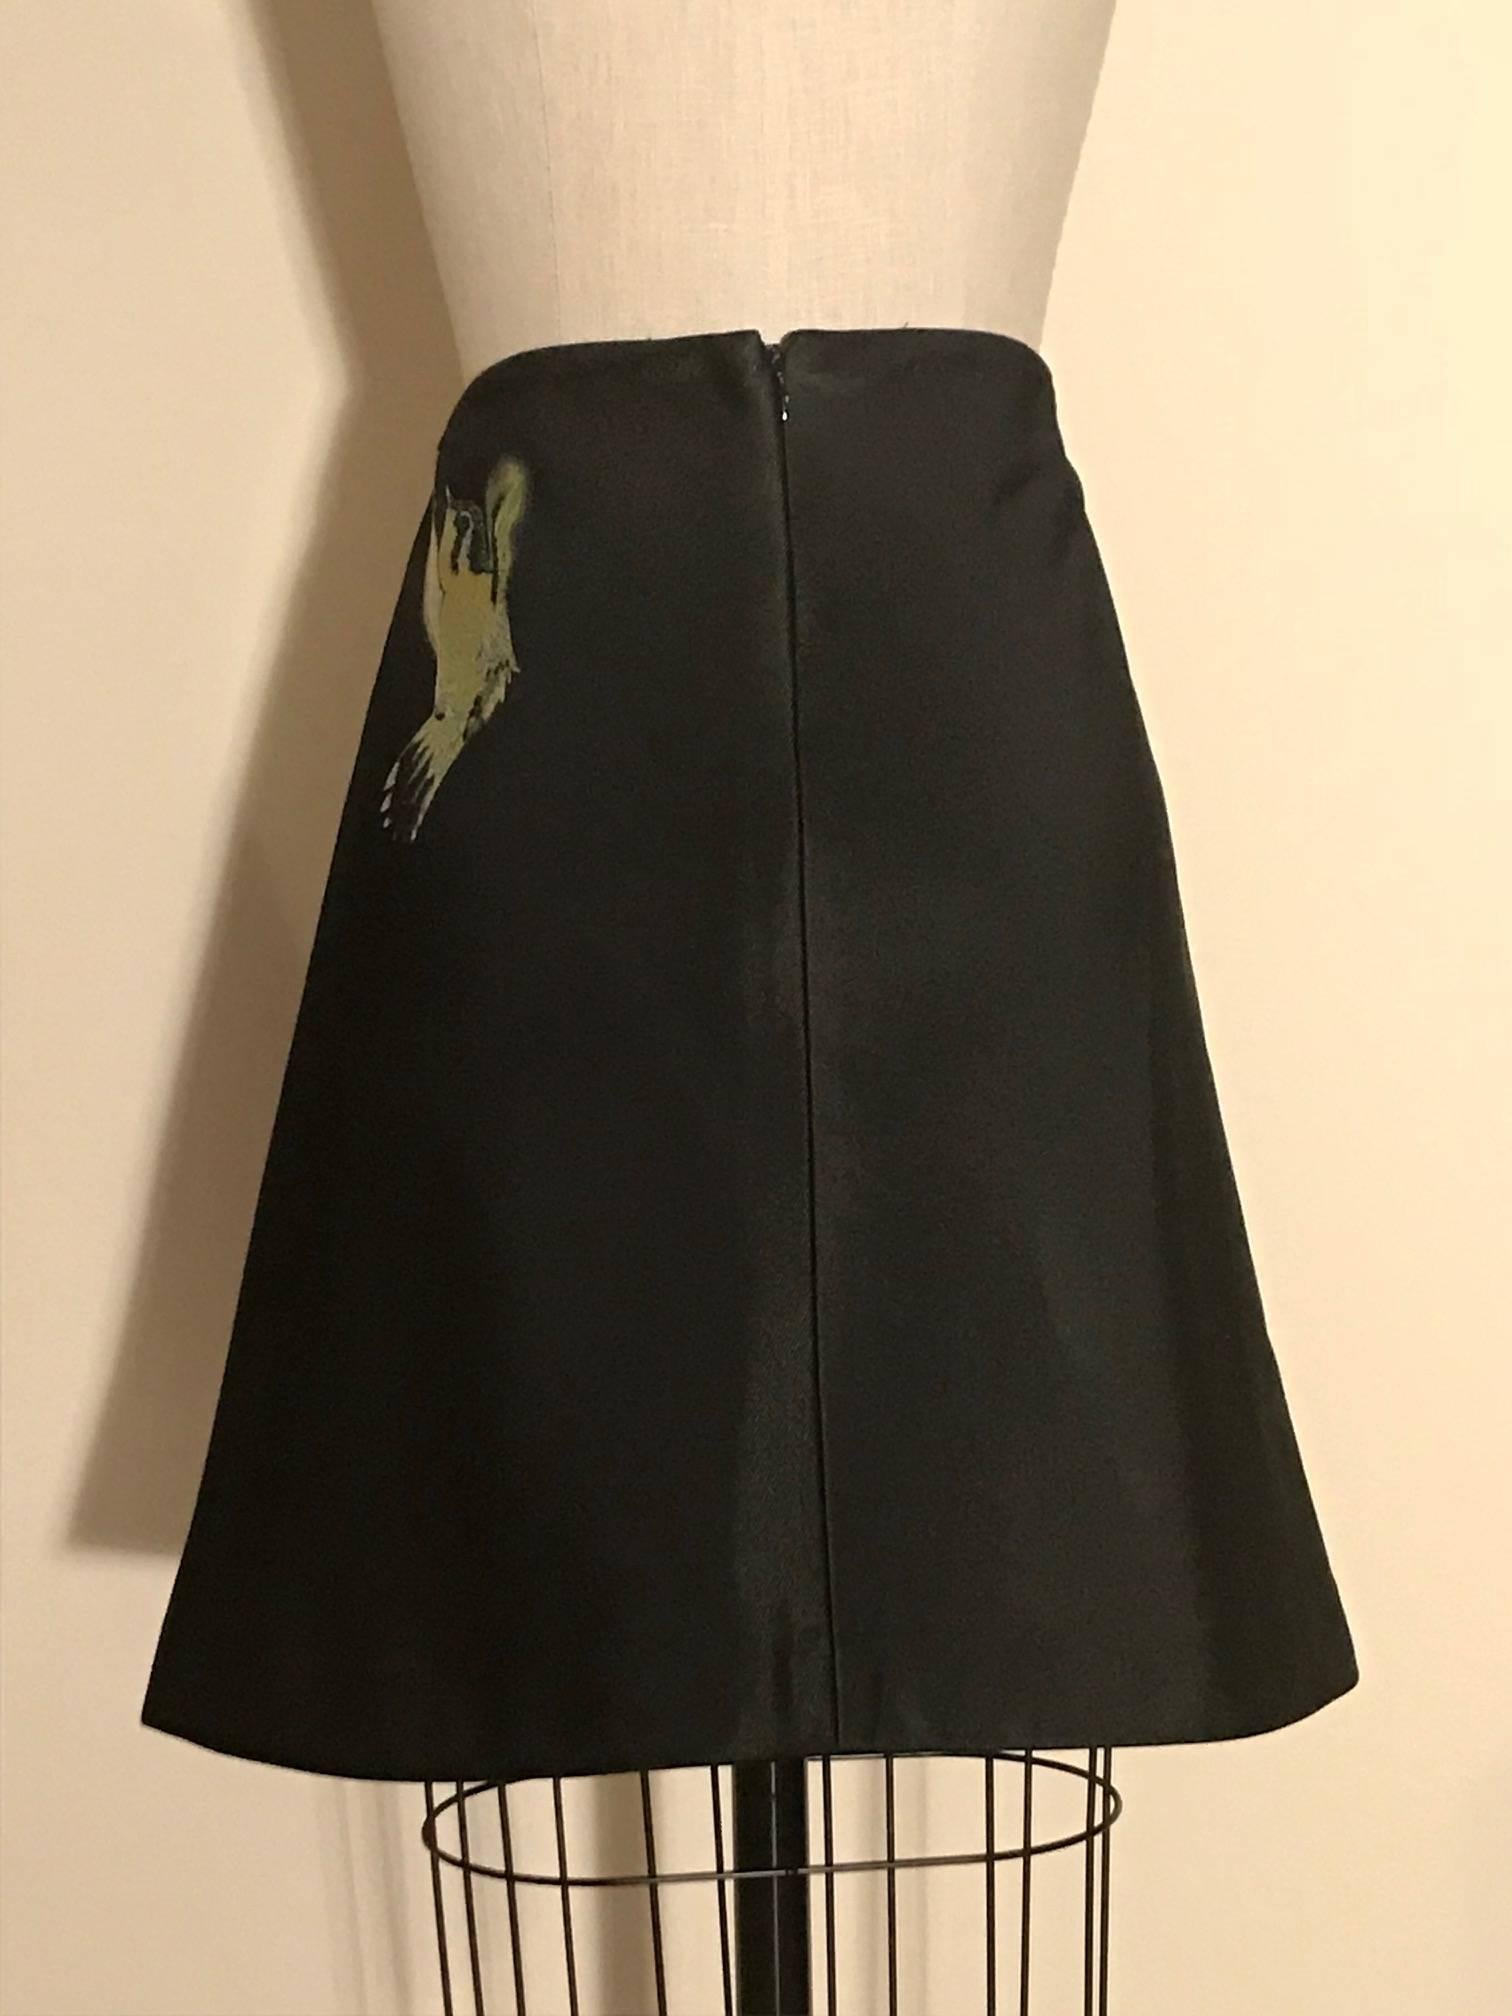 Alexander McQueen black A-line skirt featuring a hummingbird and smoke like wisp pattern. Overlapping slit at center front. Back zip and hook and eye.

Judging by the large format tag, we think this piece may be a production sample.

No content